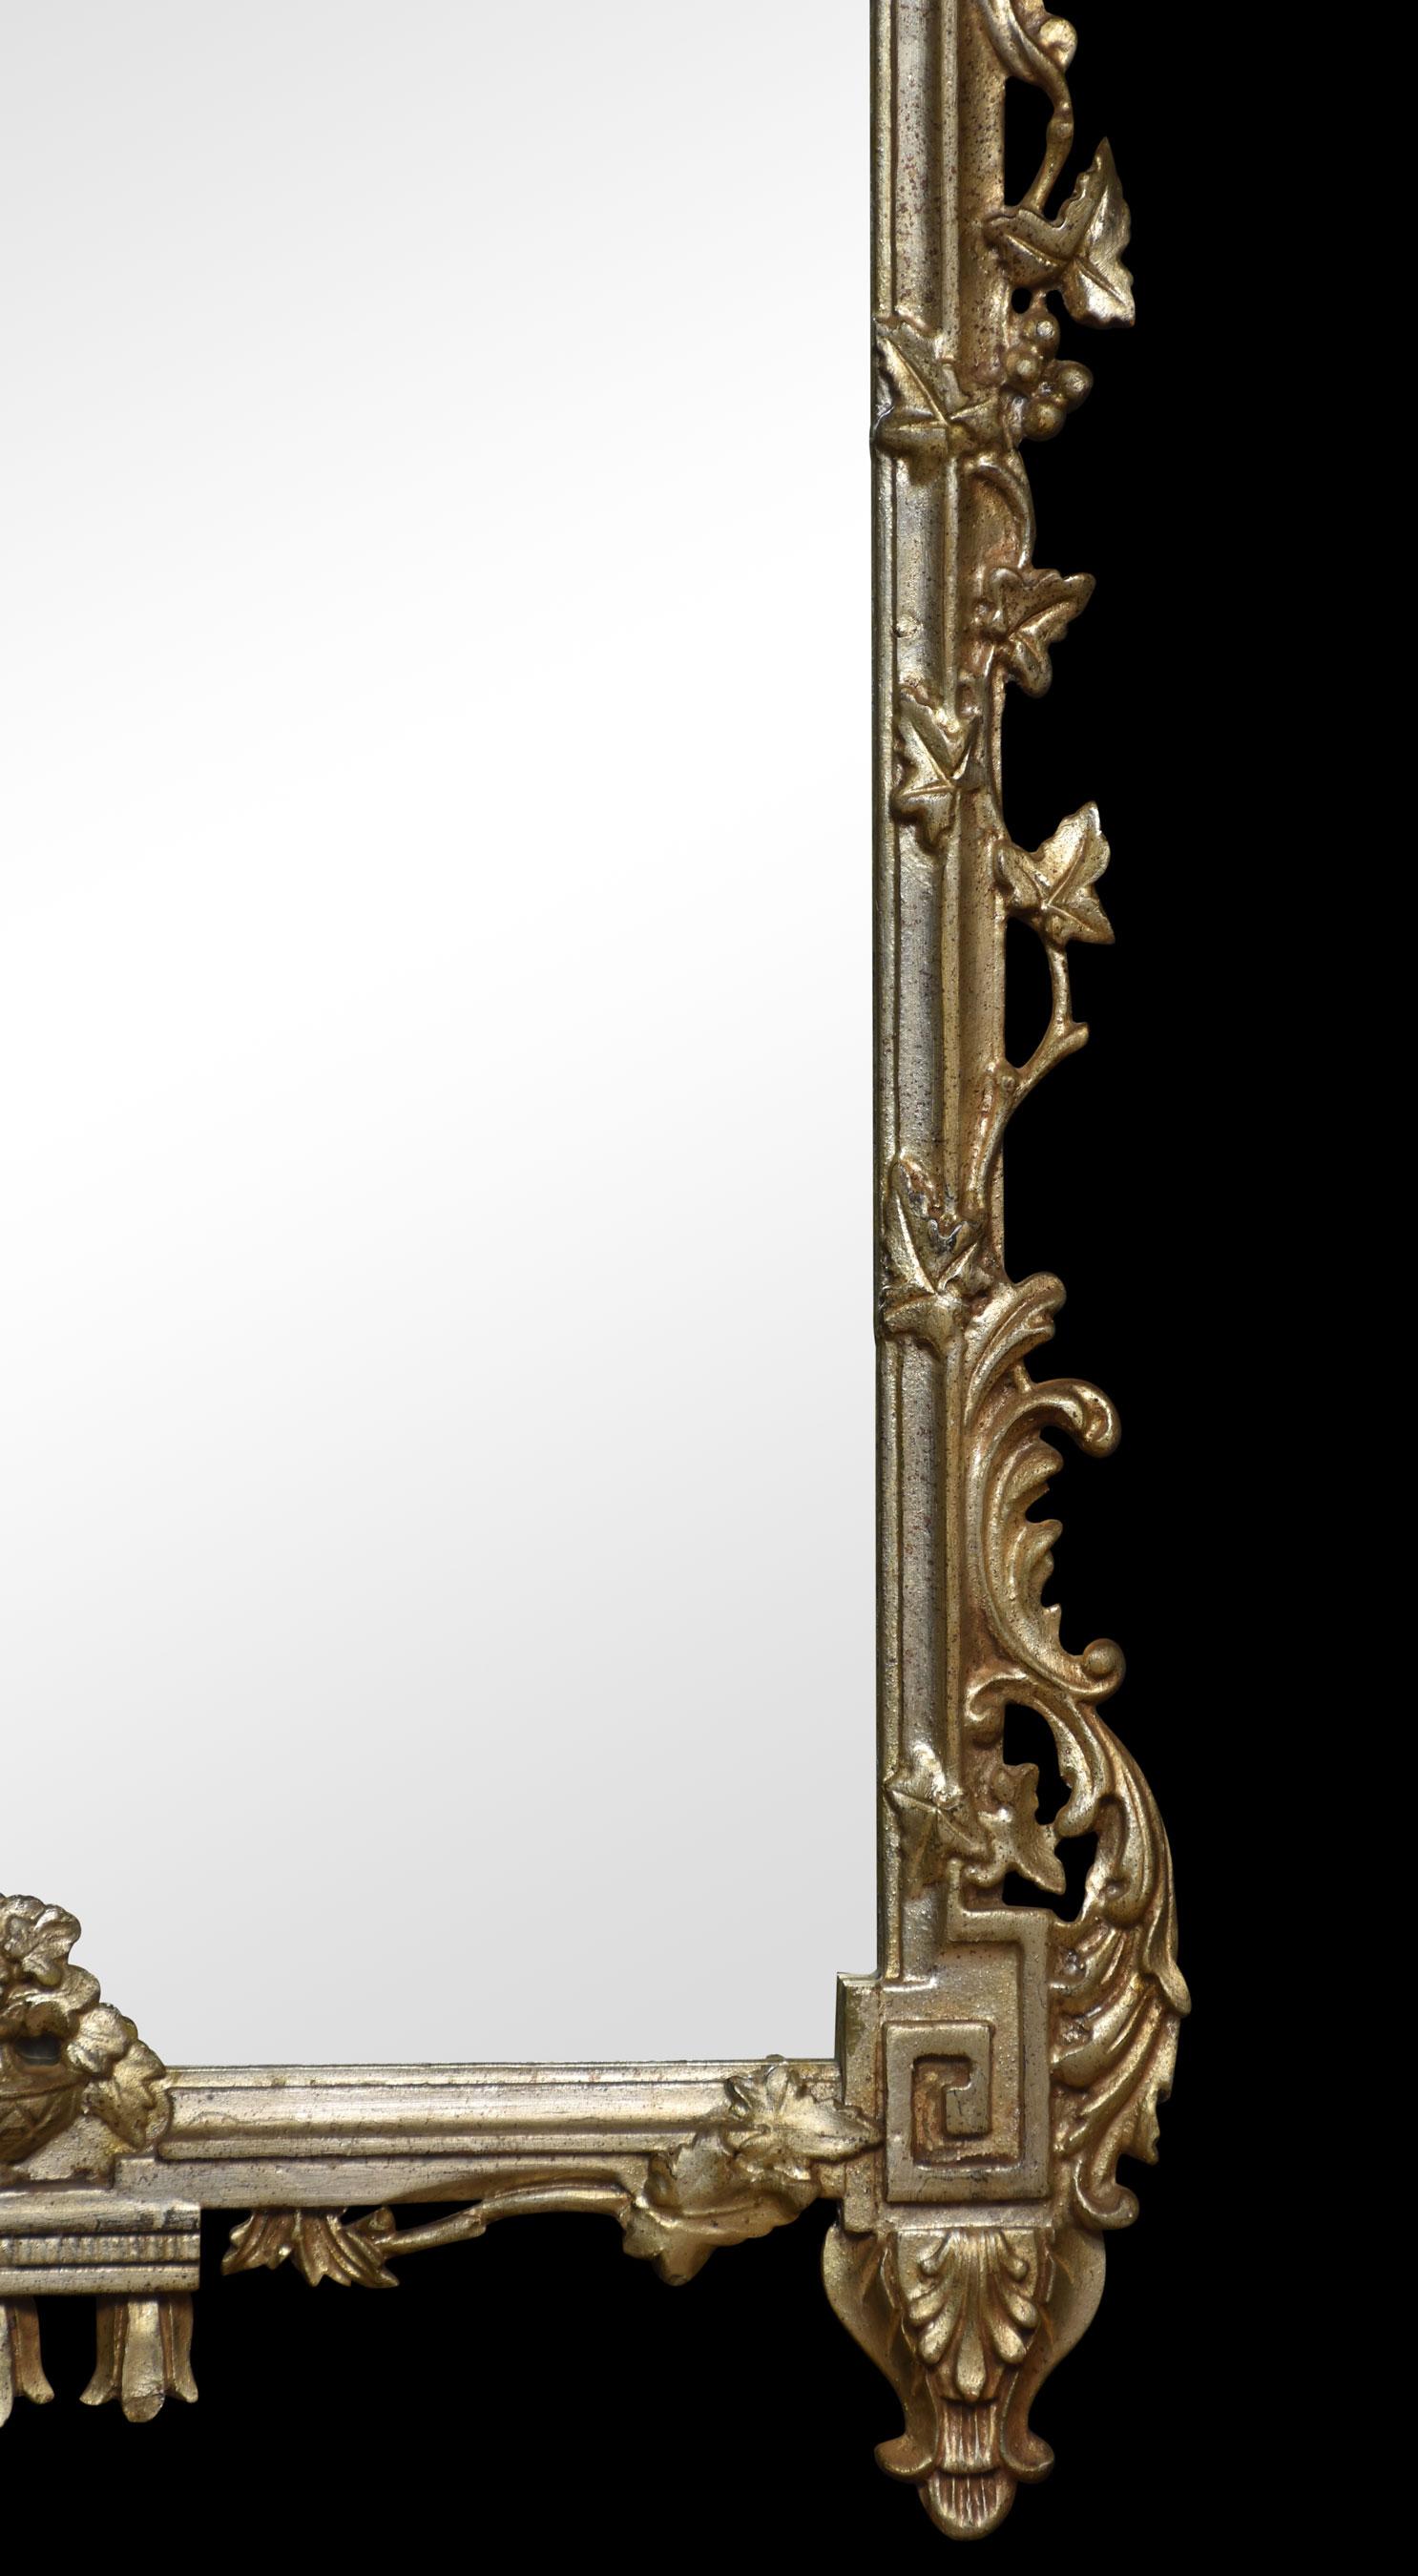 18th-century Venetian-style silvered wall mirror, with fruiting urn crest and Greek key corners to the original mirror plate surrounded by floral detail.
Dimensions
Height 55.5 Inches
Width 32.5 Inches
Depth 3 Inches.